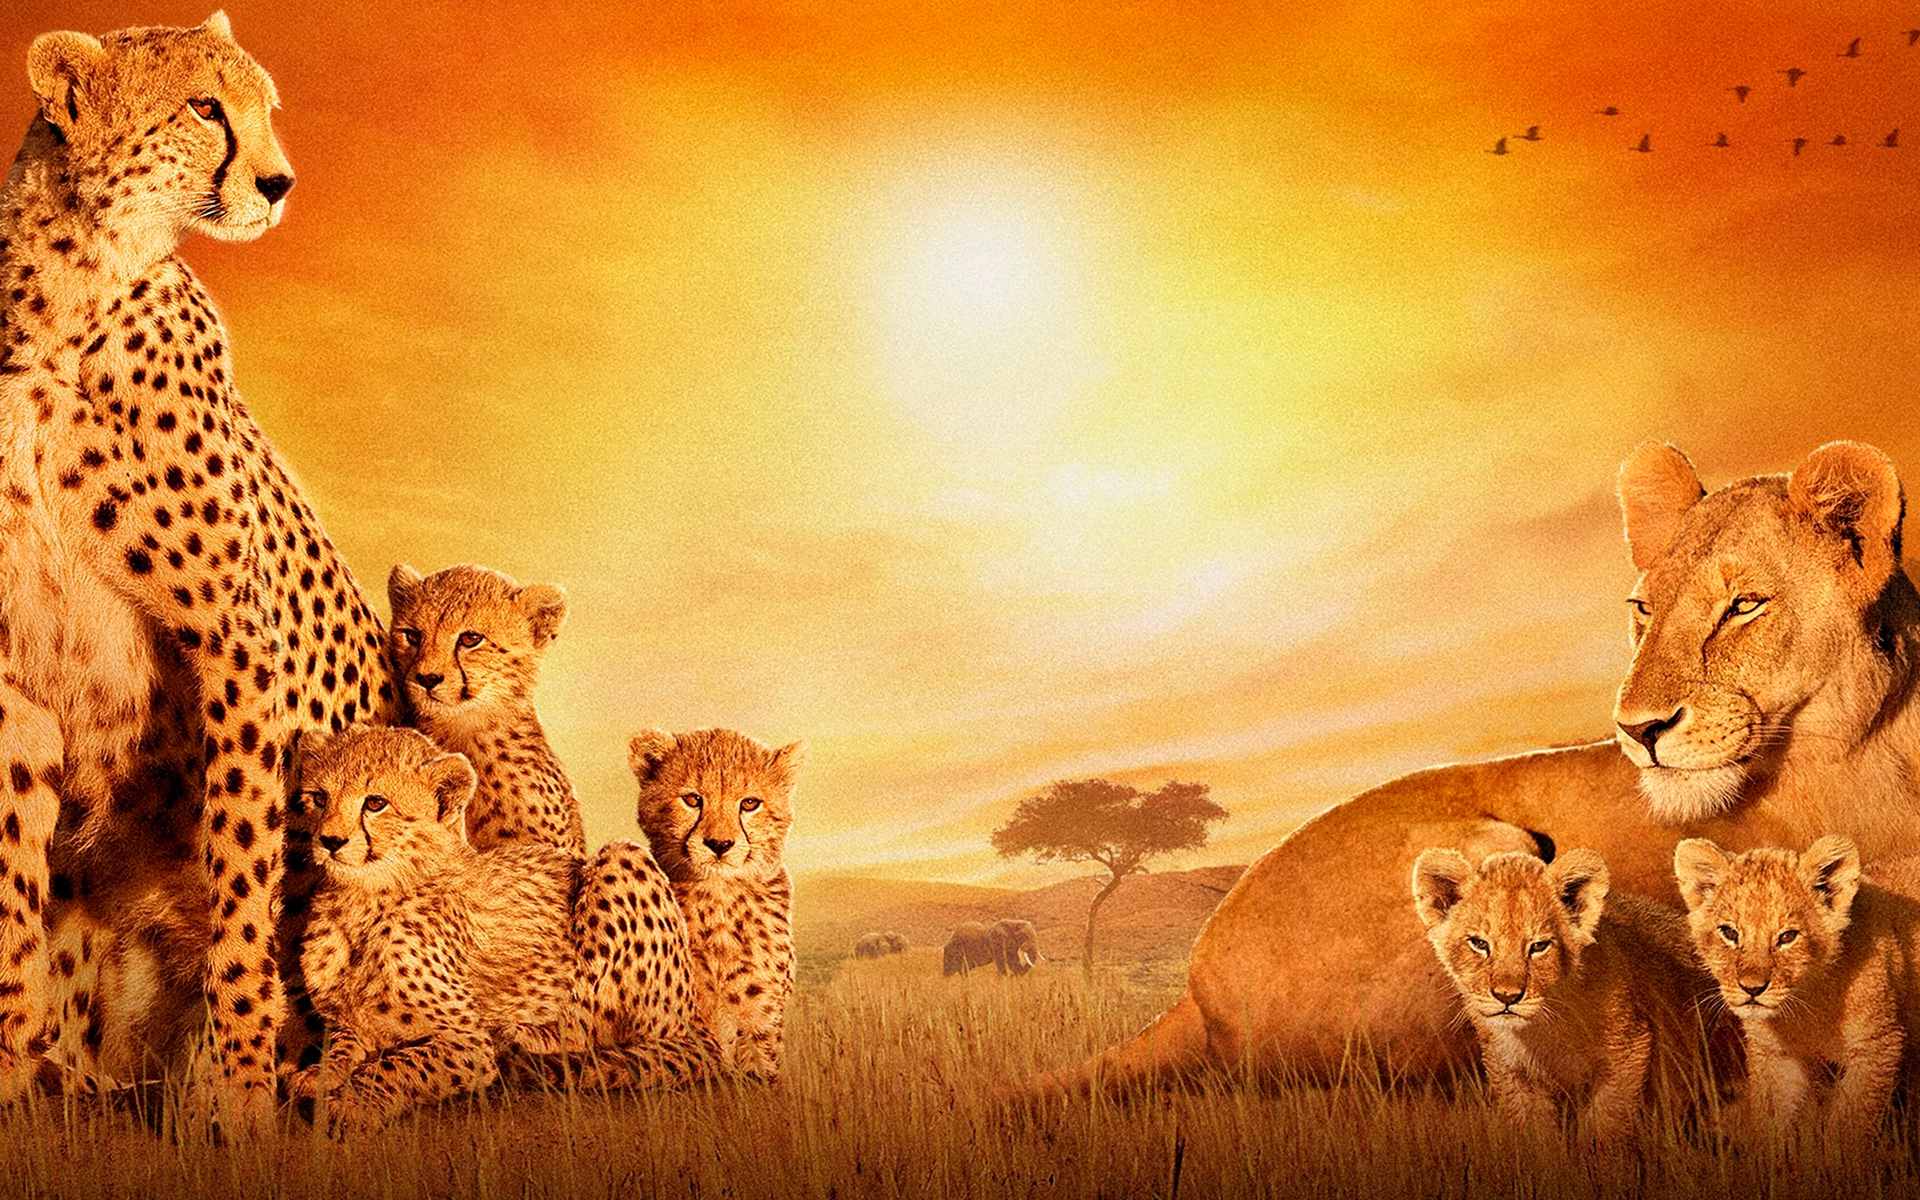 20 Africa wallpapers HD  Download Free backgrounds